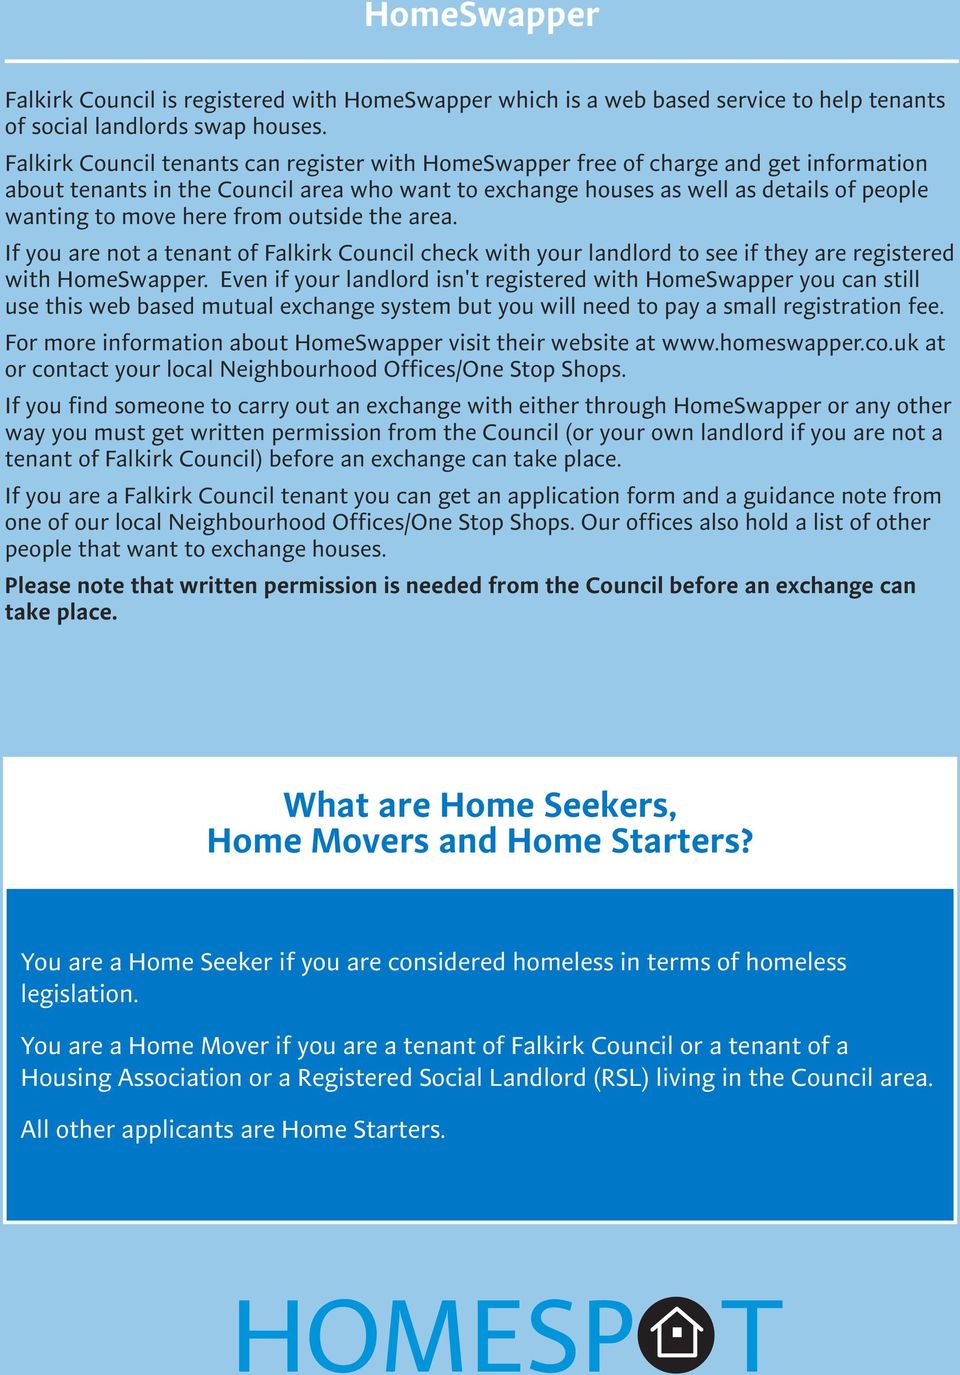 here from outside the area. If you are not a tenant of Falkirk Council check with your landlord to see if they are registered with HomeSwapper.